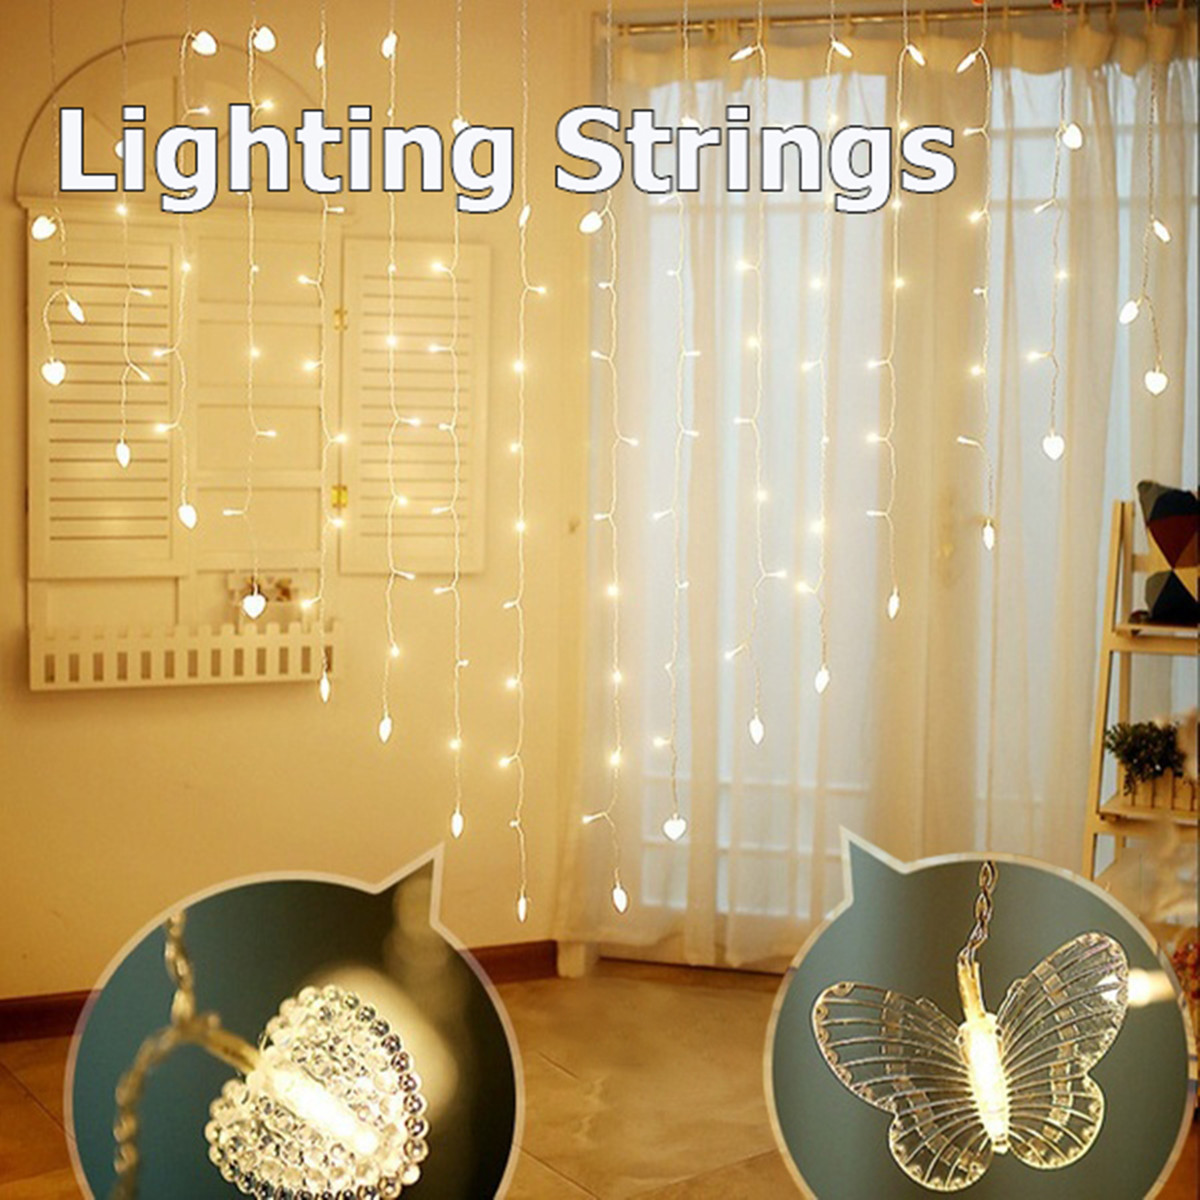 200X150cm-LED-LoveButterfly-Shape-Curtain-Lights-String-USB-Powered-Waterproof-Wall-Light-Hanging-Fa-1704556-1